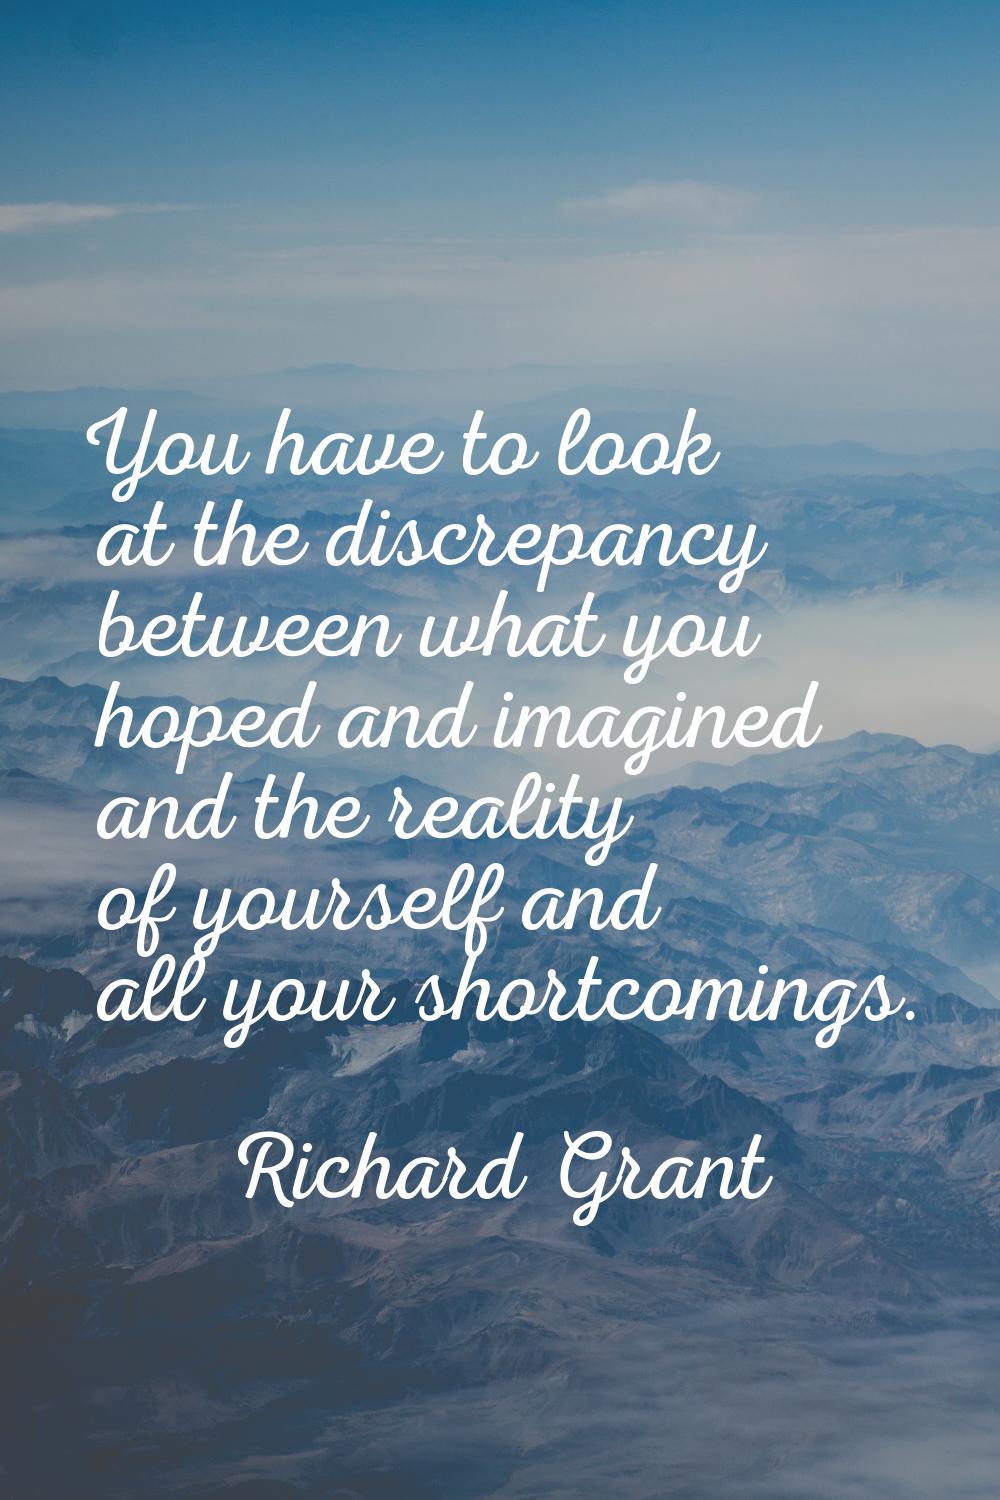 You have to look at the discrepancy between what you hoped and imagined and the reality of yourself